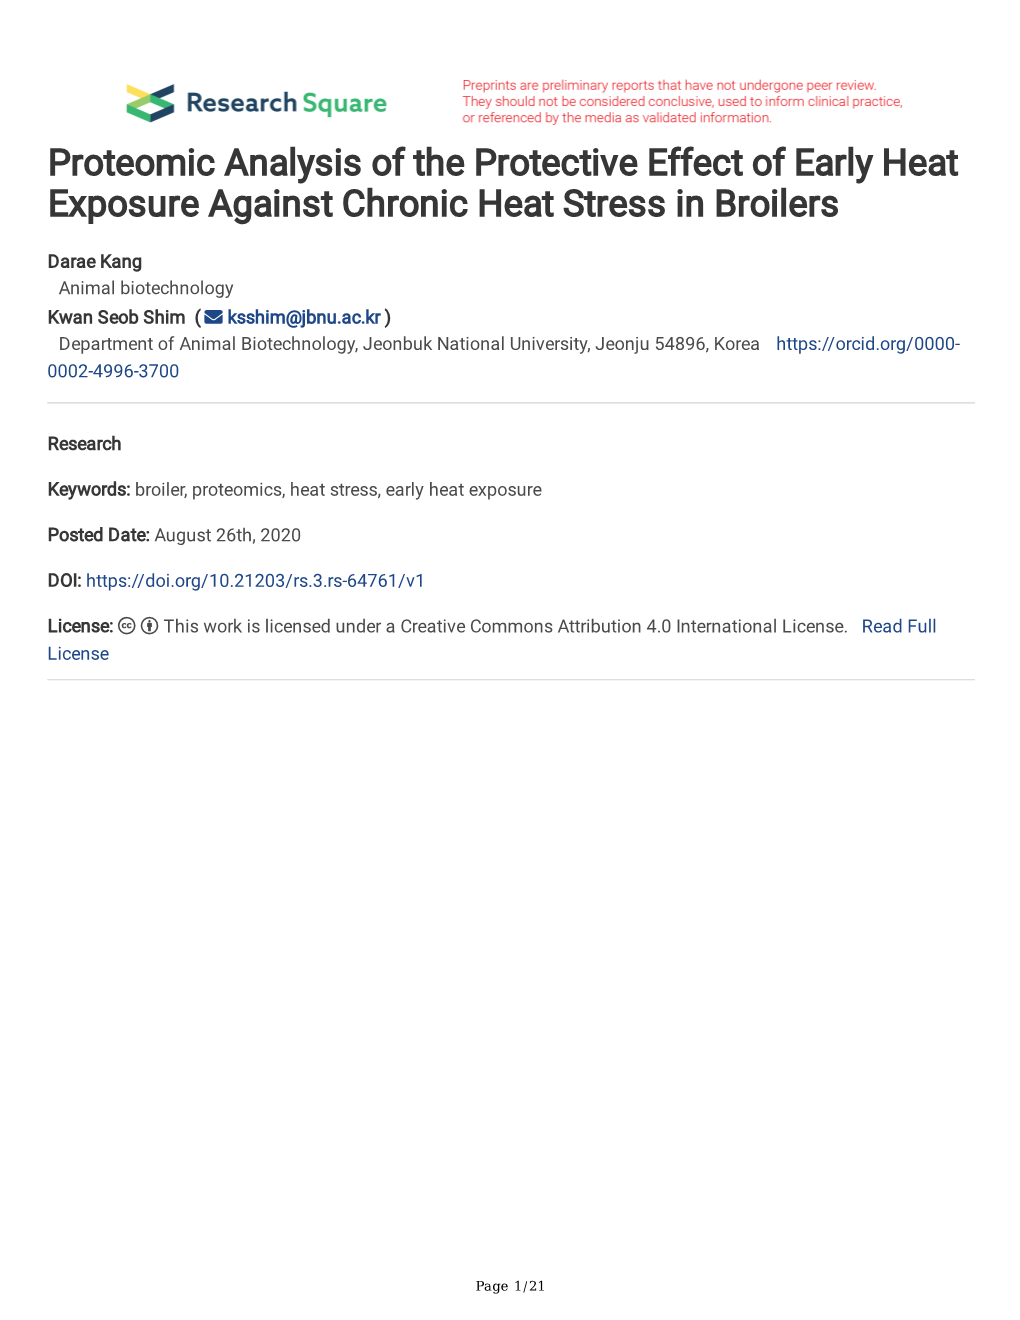 Proteomic Analysis of the Protective Effect of Early Heat Exposure Against Chronic Heat Stress in Broilers